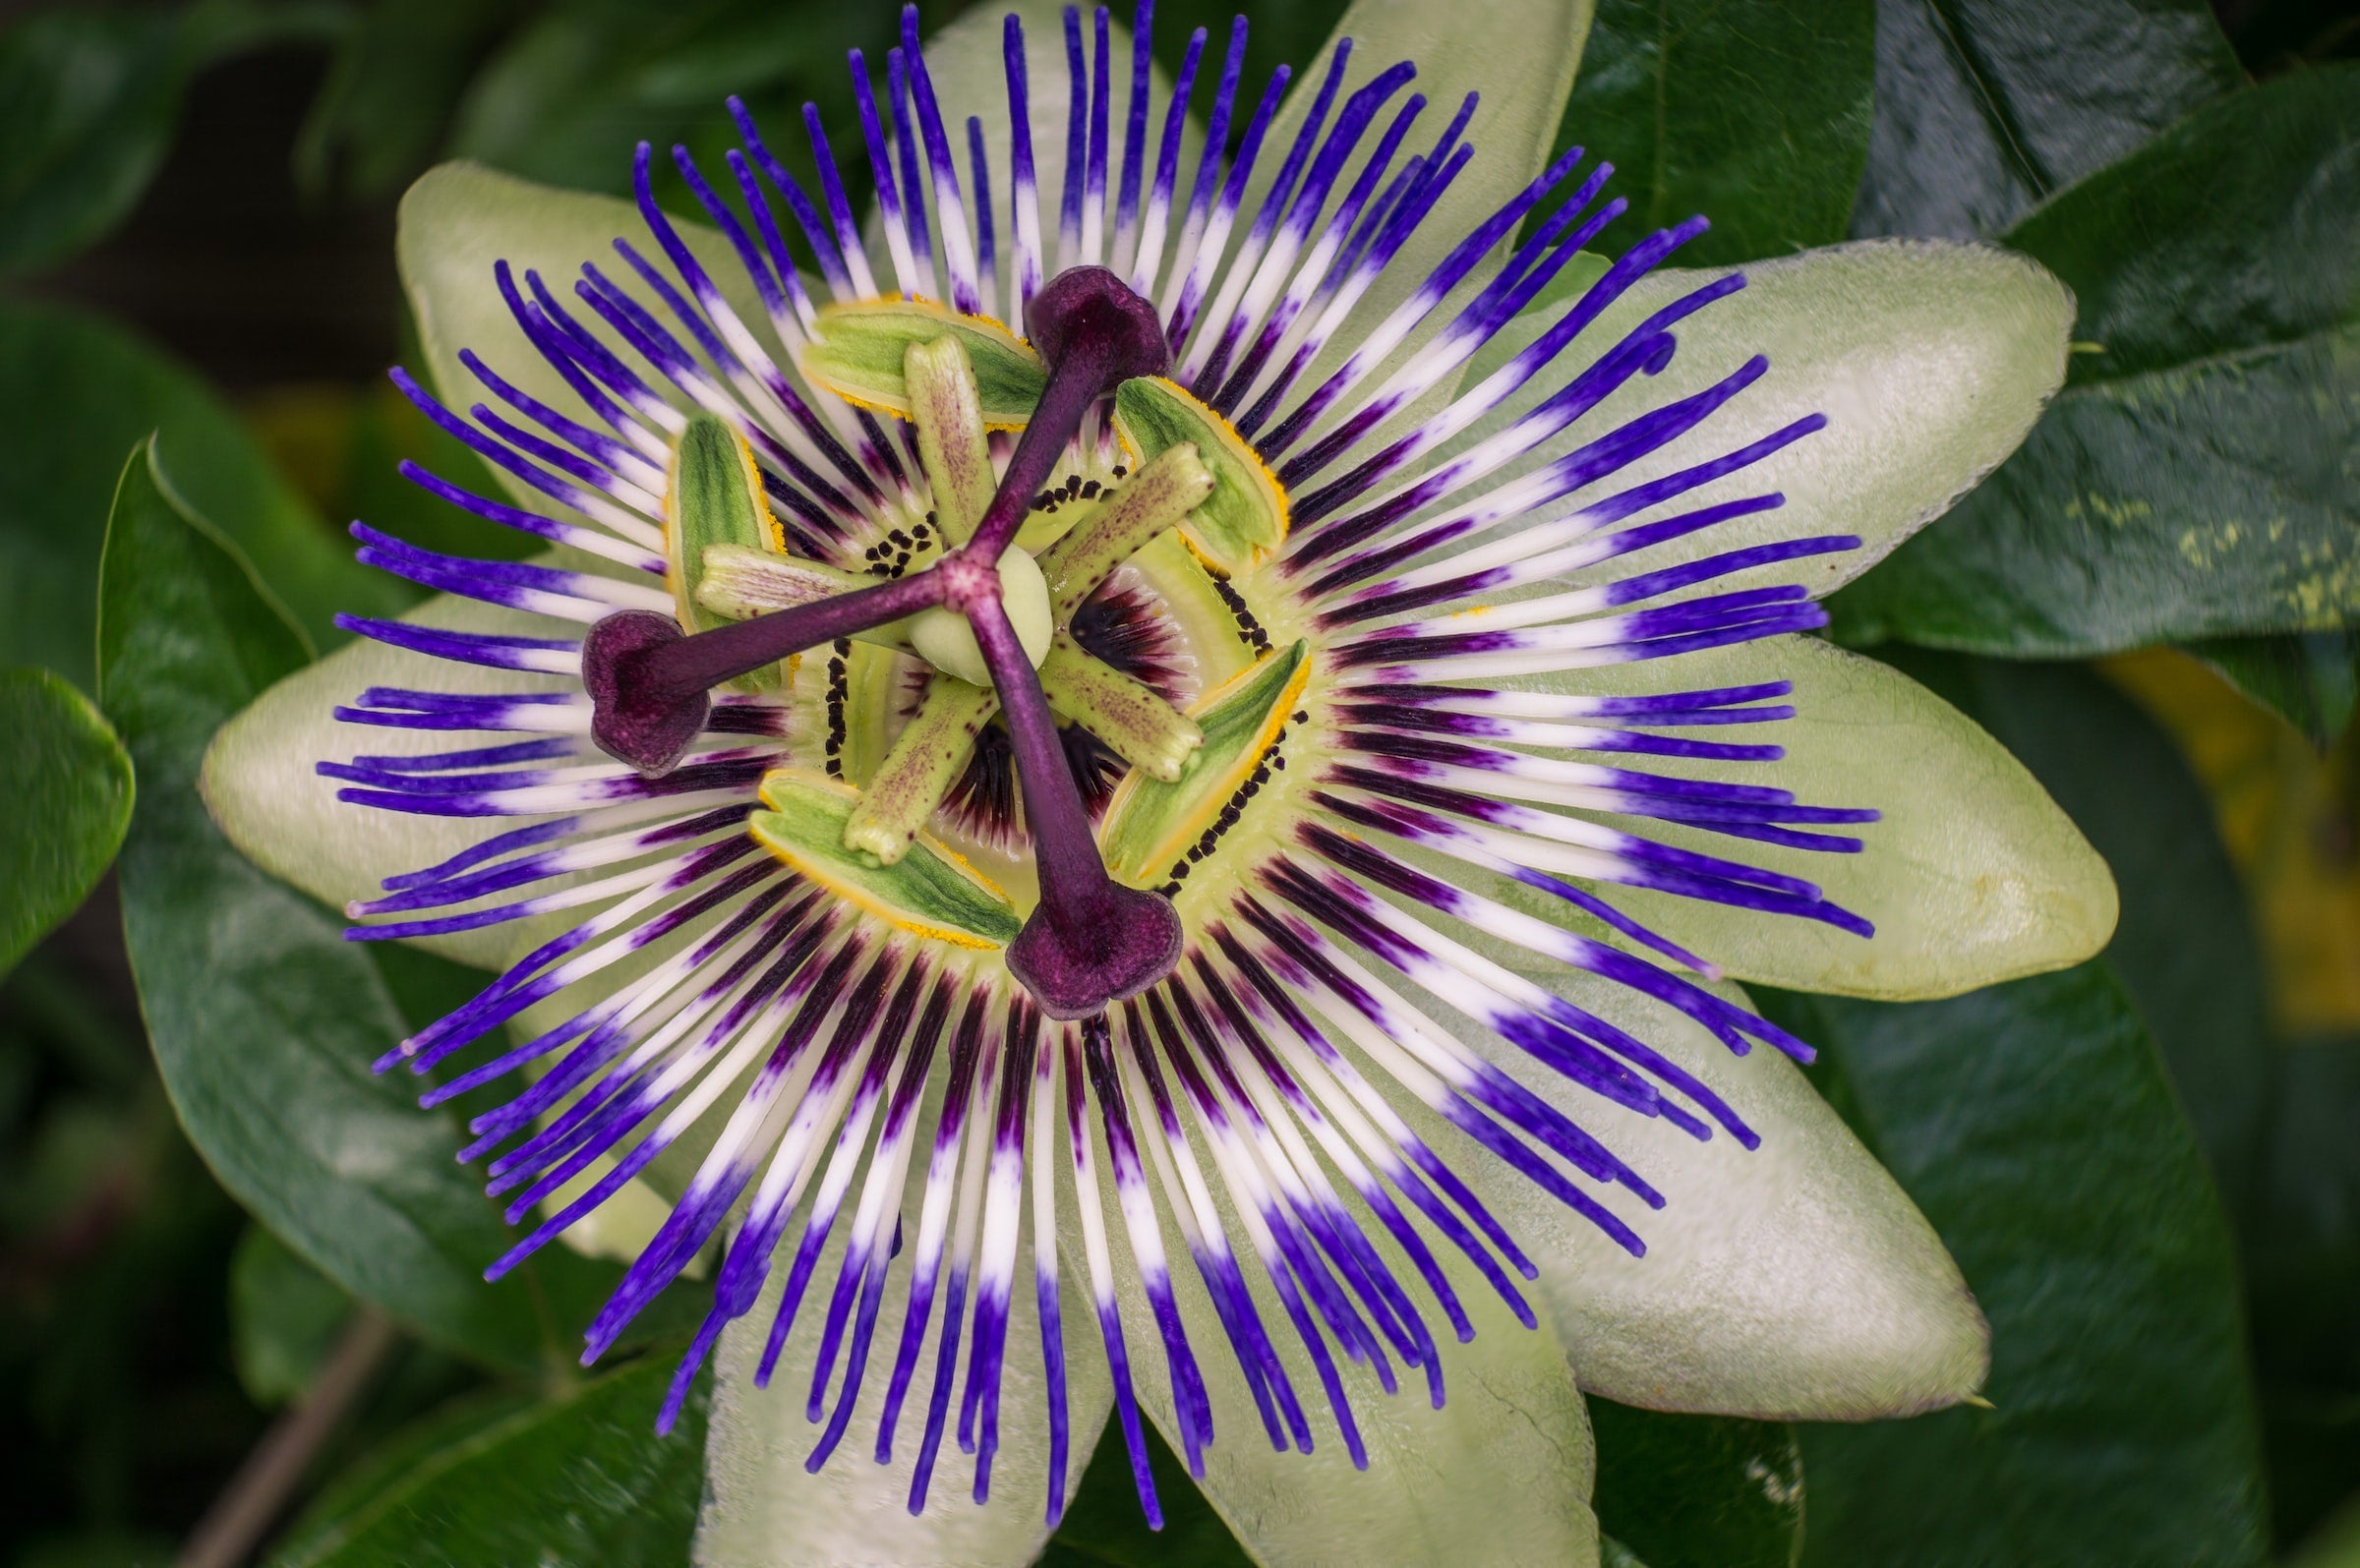 passionflower for relaxation and stress relief | wile